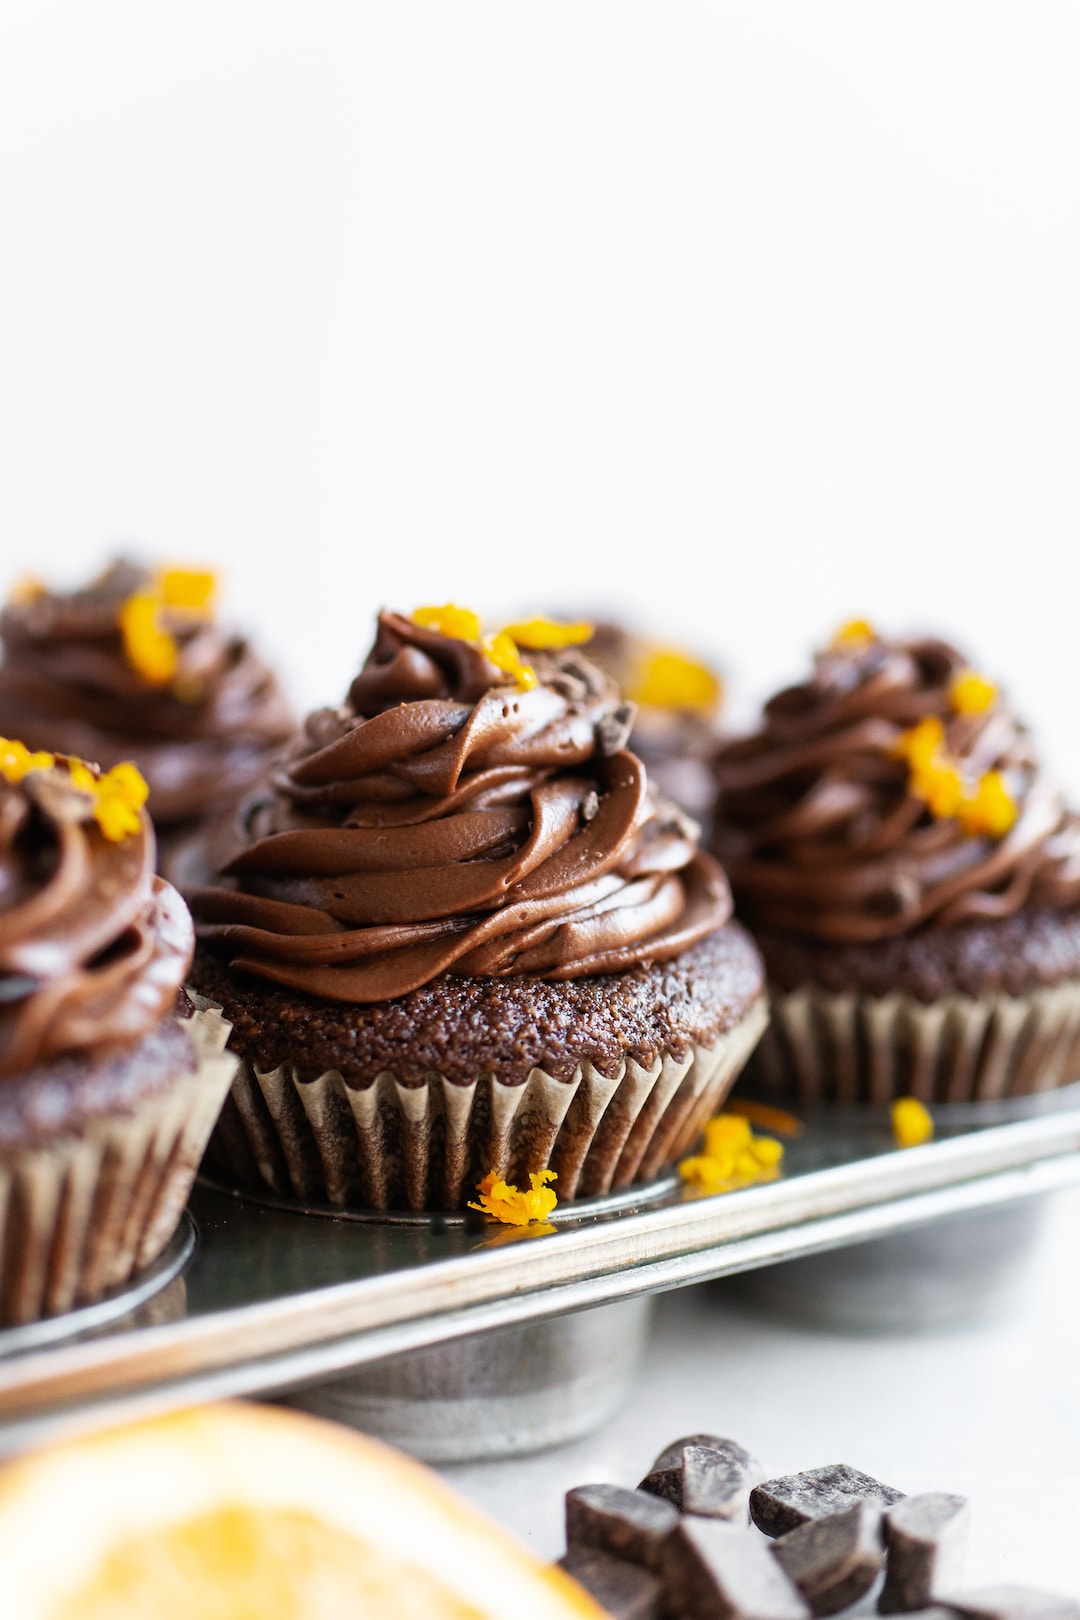 image of chocolate orange cupcakes from the side topped with orange zest and a white background